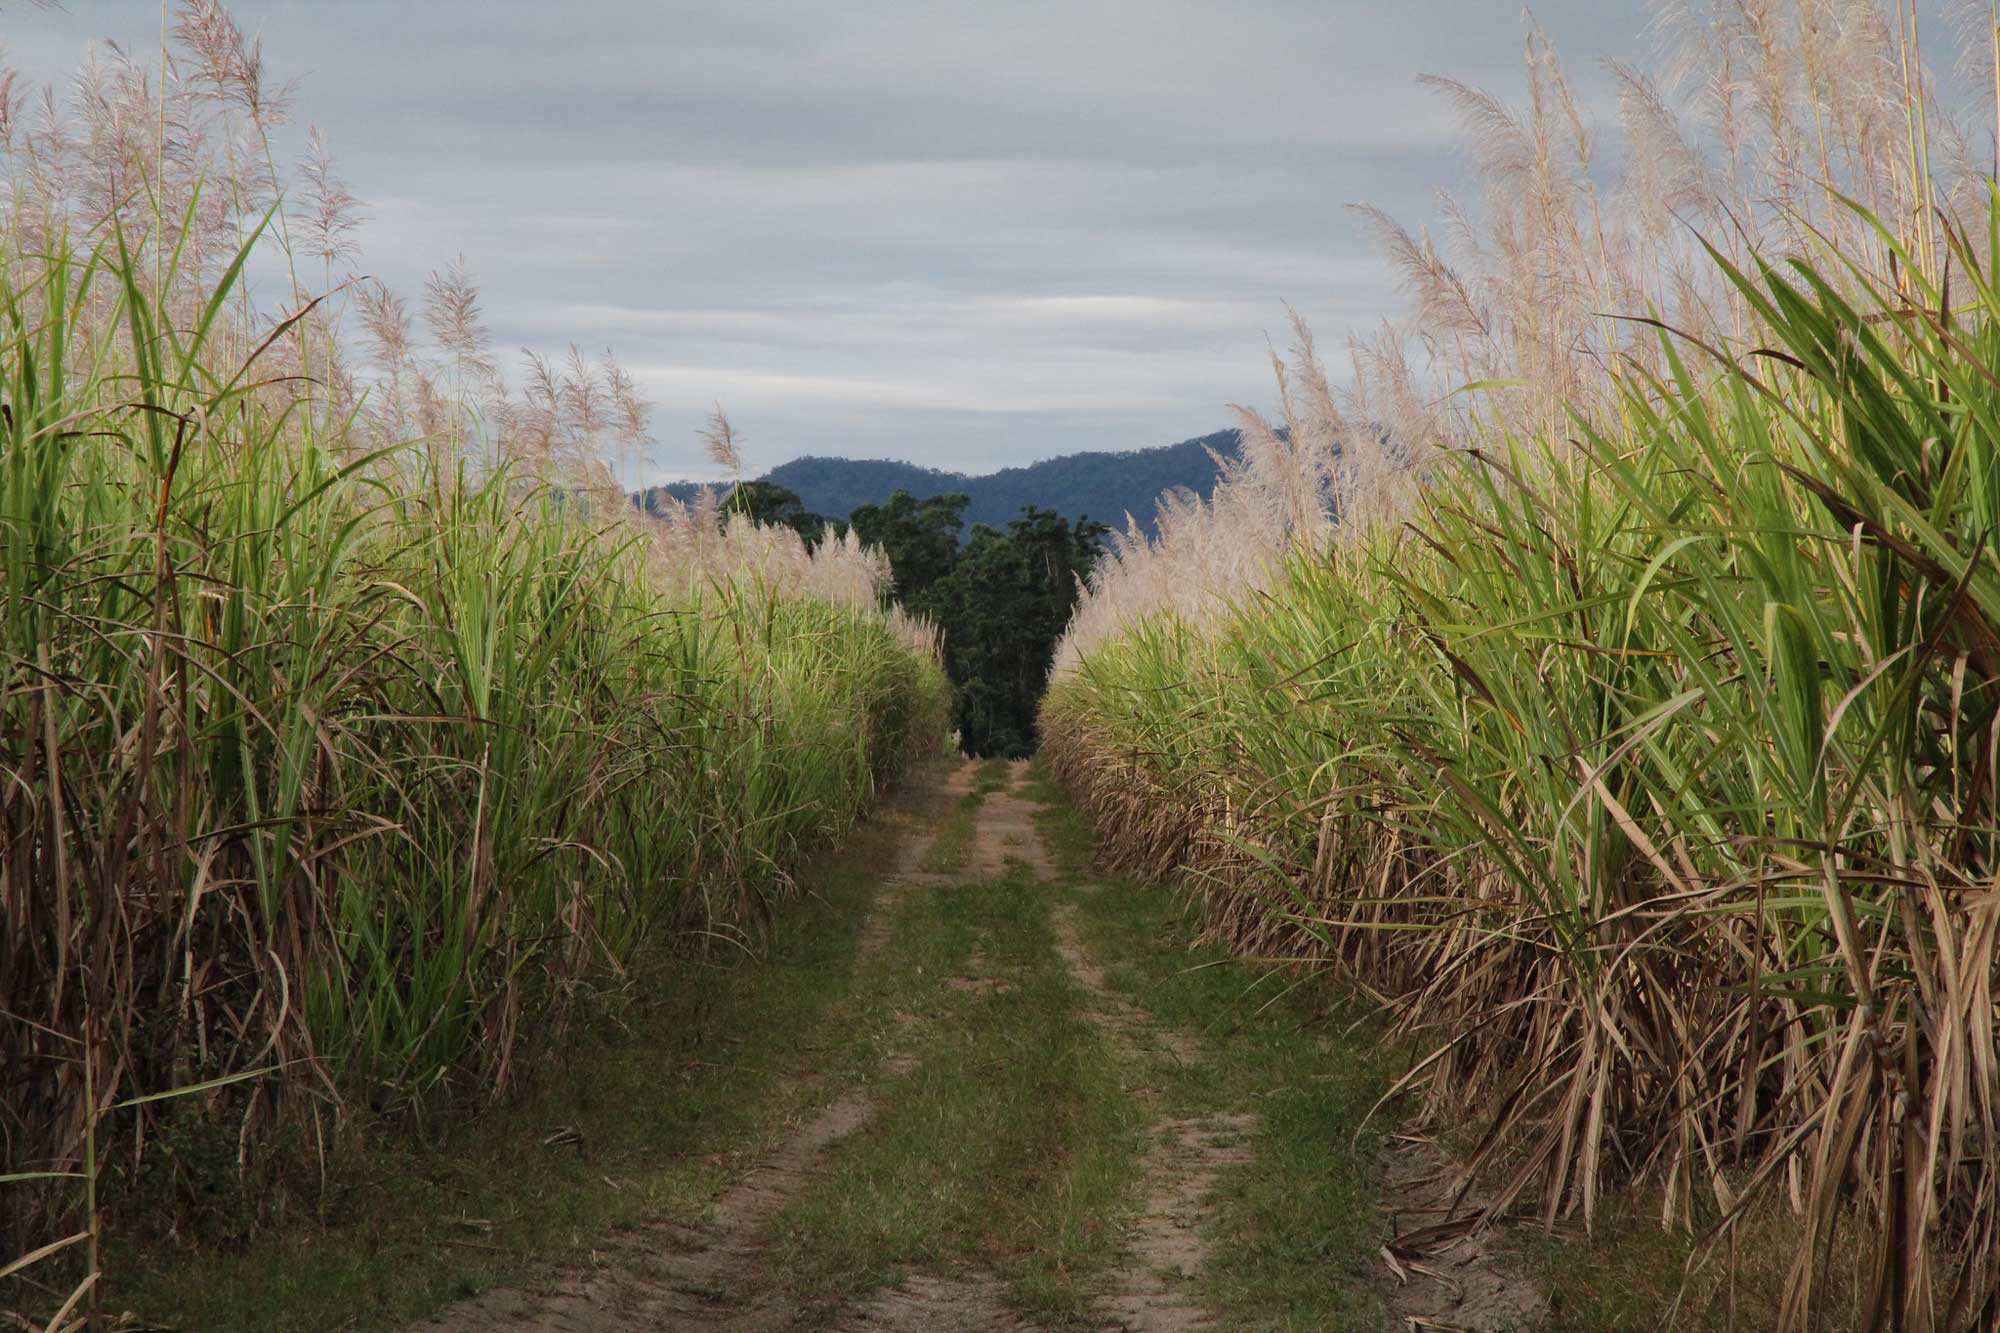 Photograph of a road running through a sugarcane field in Queensland, Australia. The photo shows a grass-and-dirt road running through two walls of cultivated sugarcane. The sugarcane plants in the photo are relatively mature and in flower.